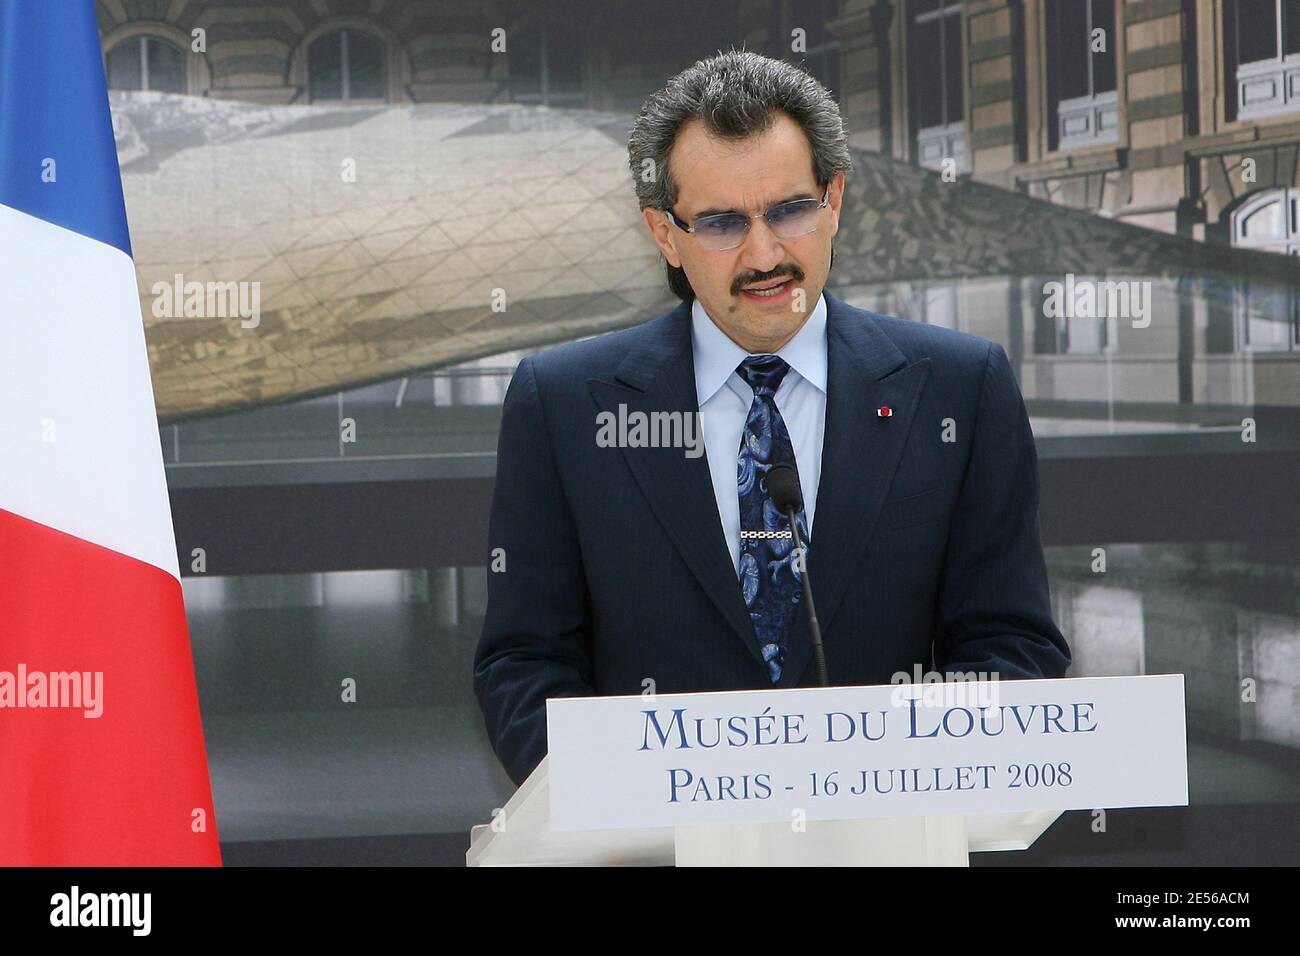 Saudi Arabian Prince Alwaleed bin Talal Bin Abdul aziz Al Saud delivers a speech at Louvre museum's in Paris, France, on July 16, 2008 during the ceremony marking the launch of the works. Photo by Pierre Villard/Pool/ABACAPRESS.COM Stock Photo